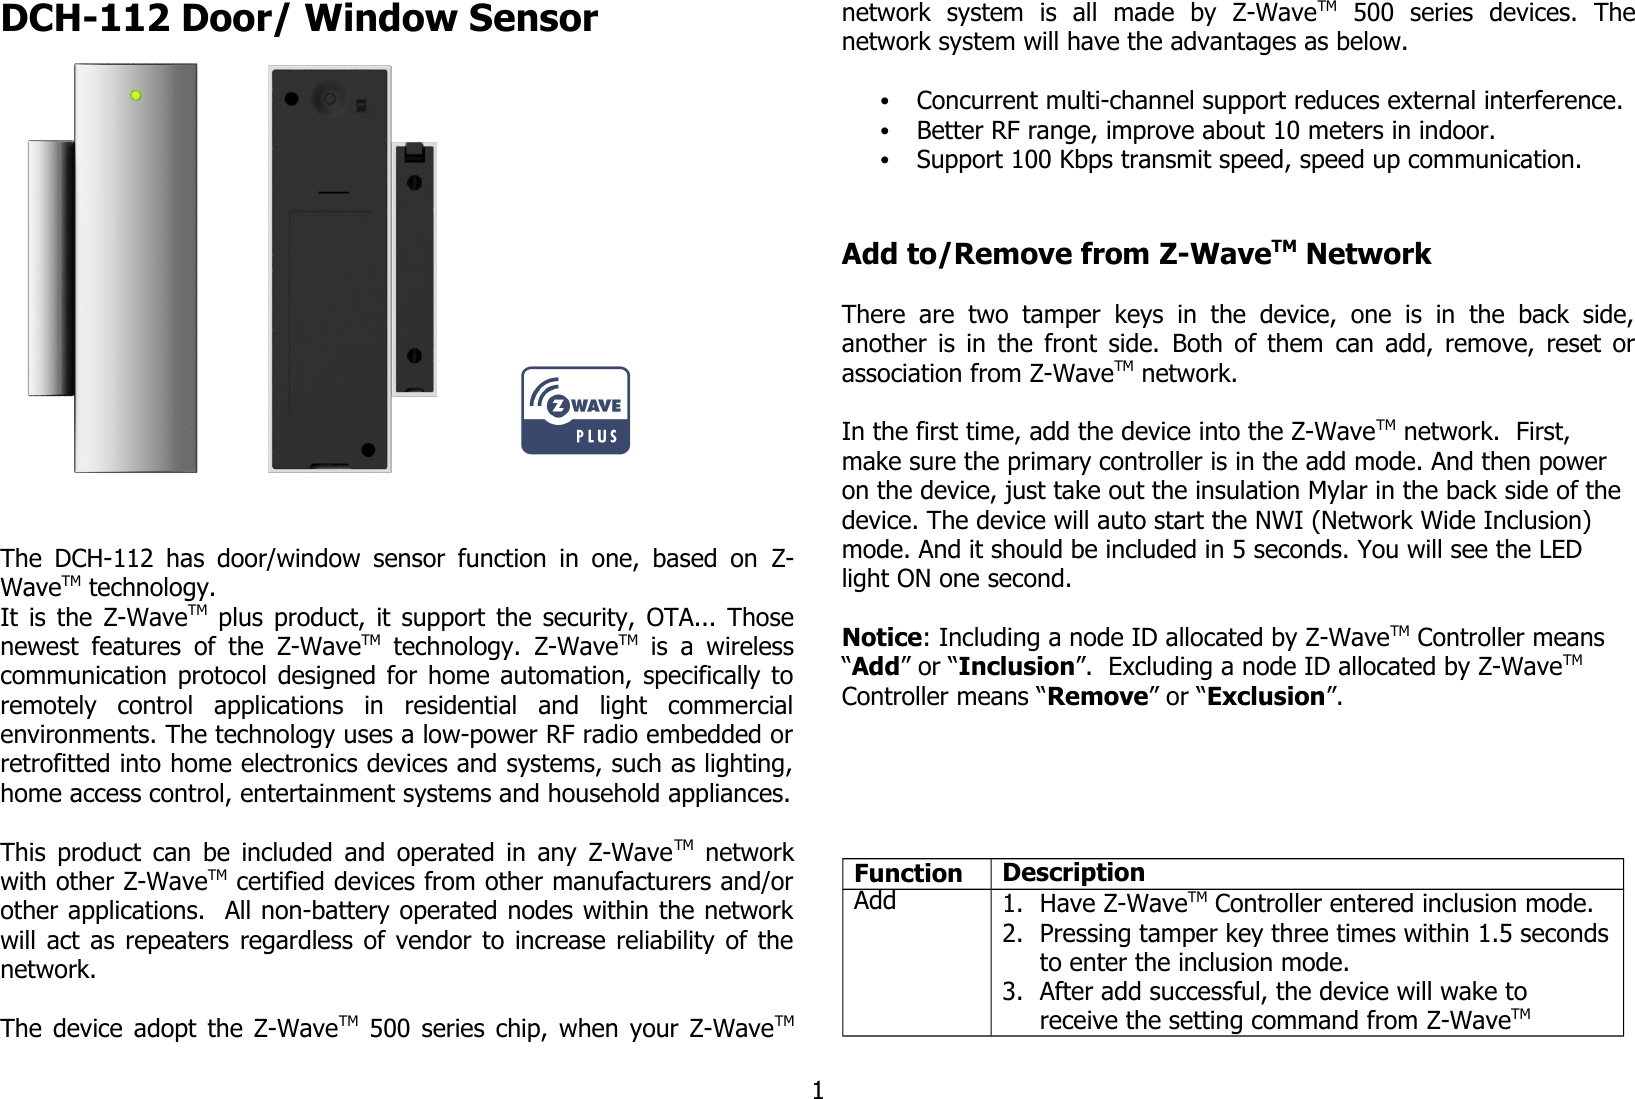 DCH-112 Door/ Window Sensor                 The DCH-112 has door/window sensor function in one, based on  Z-WaveTM technology.It is the  Z-WaveTM  plus product, it support the security, OTA... Thosenewest features of the  Z-WaveTM  technology.  Z-WaveTM  is a wirelesscommunication protocol designed for home automation, specifically toremotely   control   applications   in   residential   and   light   commercialenvironments. The technology uses a low-power RF radio embedded orretrofitted into home electronics devices and systems, such as lighting,home access control, entertainment systems and household appliances.This product can be included and operated in any Z-WaveTM  networkwith other Z-WaveTM certified devices from other manufacturers and/orother applications.  All non-battery operated nodes within the networkwill act as repeaters regardless of vendor to increase reliability of thenetwork. The device adopt the Z-WaveTM  500 series chip, when your Z-WaveTMnetwork   system   is   all   made   by   Z-WaveTM  500   series   devices.   Thenetwork system will have the advantages as below.•Concurrent multi-channel support reduces external interference.•Better RF range, improve about 10 meters in indoor.•Support 100 Kbps transmit speed, speed up communication.Add to/Remove from Z-WaveTM NetworkThere  are  two  tamper  keys  in  the  device,  one  is  in  the  back  side,another is in the front side.  Both of them  can add, remove, reset orassociation from Z-WaveTM network.In the first time, add the device into the Z-WaveTM network.  First, make sure the primary controller is in the add mode. And then power on the device, just take out the insulation Mylar in the back side of the device. The device will auto start the NWI (Network Wide Inclusion) mode. And it should be included in 5 seconds. You will see the LED light ON one second.Notice: Including a node ID allocated by Z-WaveTM Controller means “Add” or “Inclusion”.  Excluding a node ID allocated by Z-WaveTM  Controller means “Remove” or “Exclusion”.Function DescriptionAdd 1. Have Z-WaveTM Controller entered inclusion mode.2. Pressing tamper key three times within 1.5 secondsto enter the inclusion mode.3. After add successful, the device will wake to receive the setting command from Z-WaveTM 1